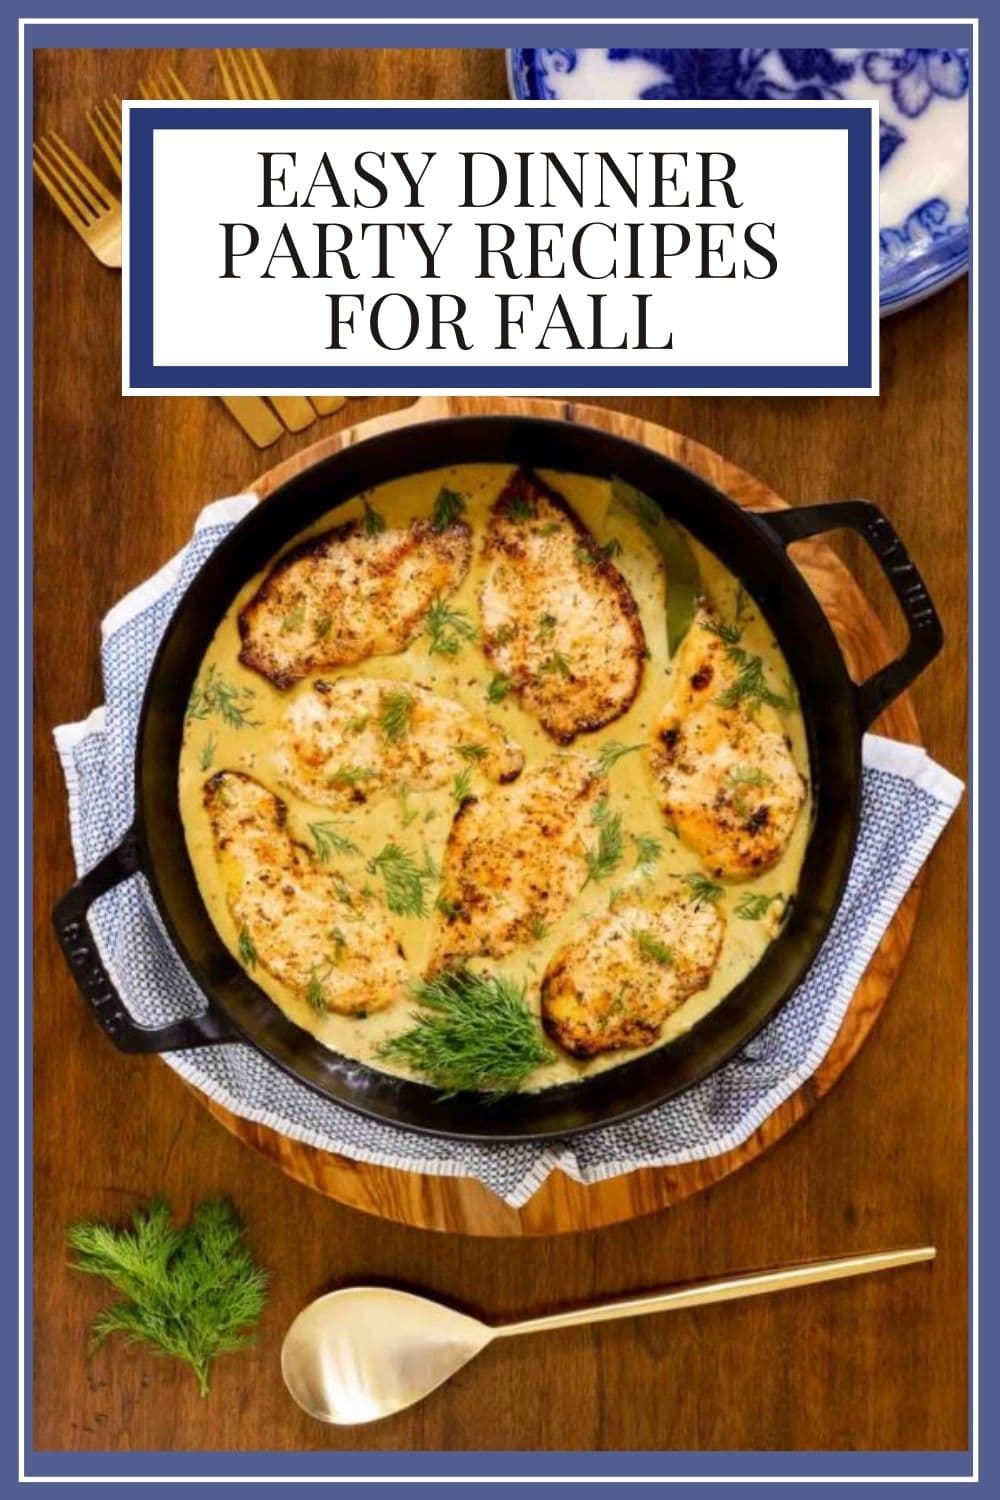 Let\'s Have a Fall Dinner Party - Easy, Make-Ahead Recipes